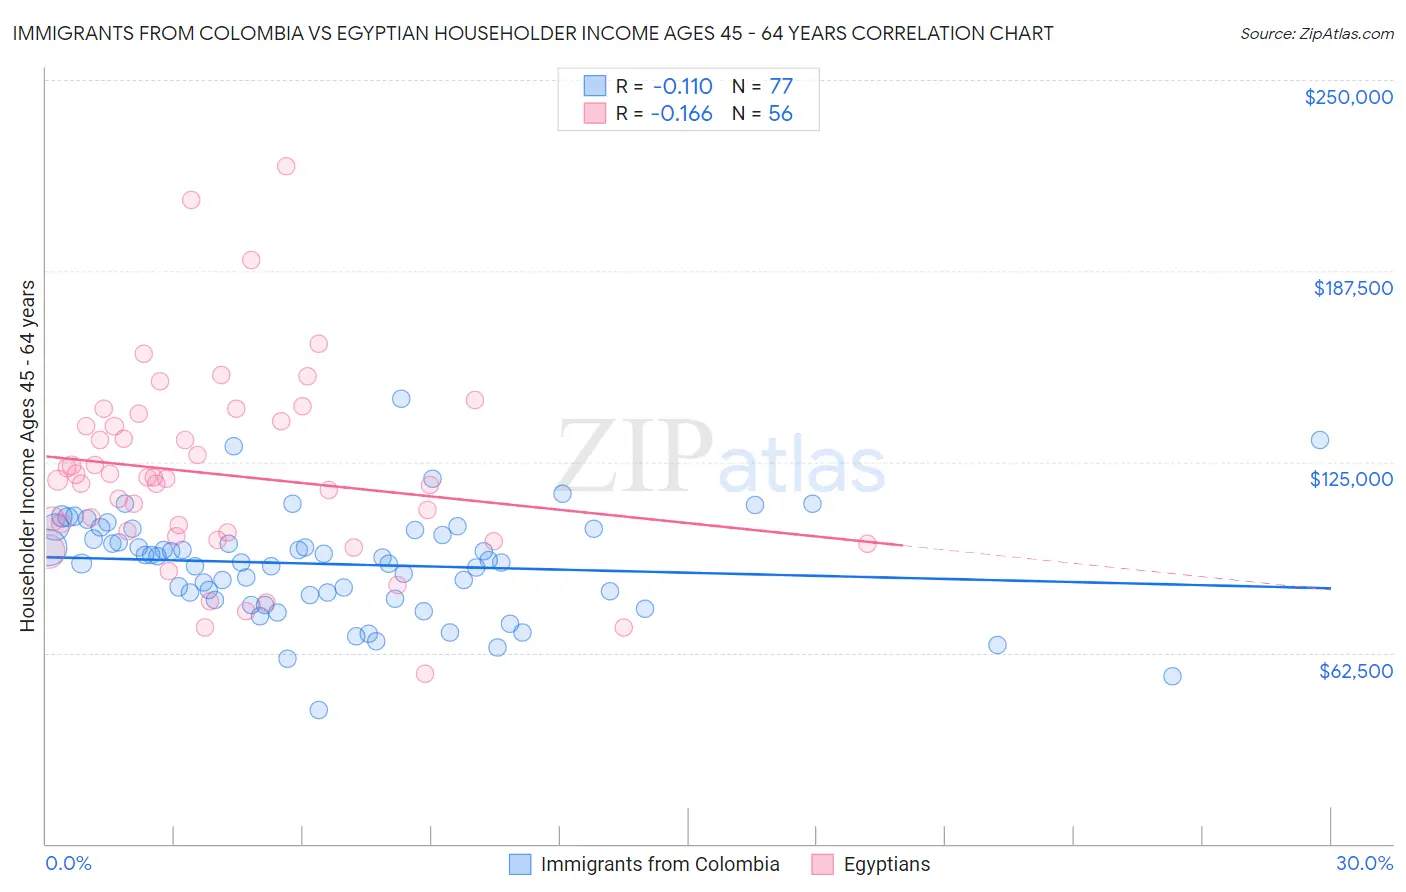 Immigrants from Colombia vs Egyptian Householder Income Ages 45 - 64 years